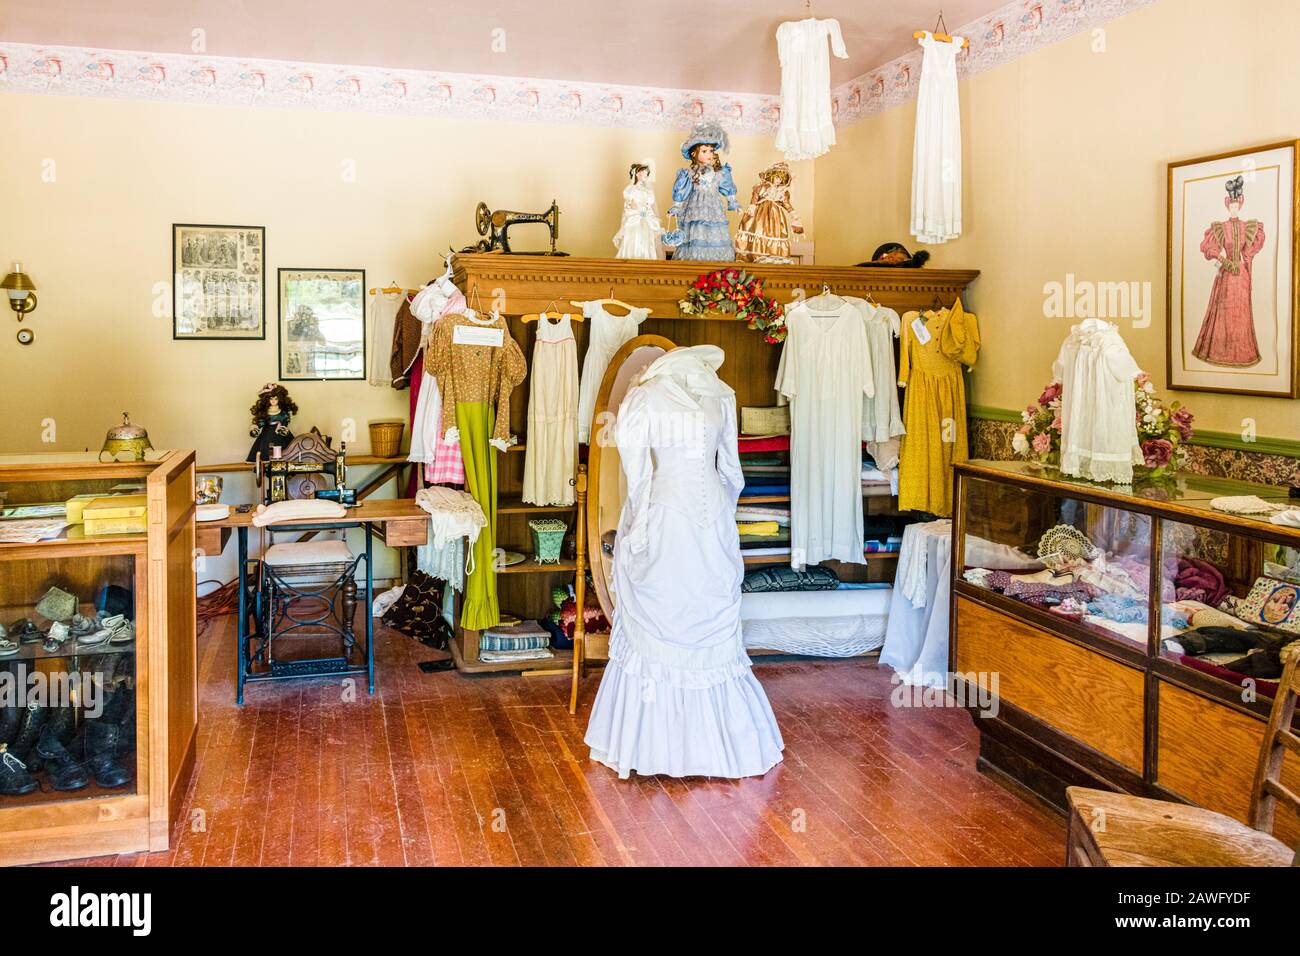 Dress Shop Interior High Resolution Stock Photography and Images - Alamy